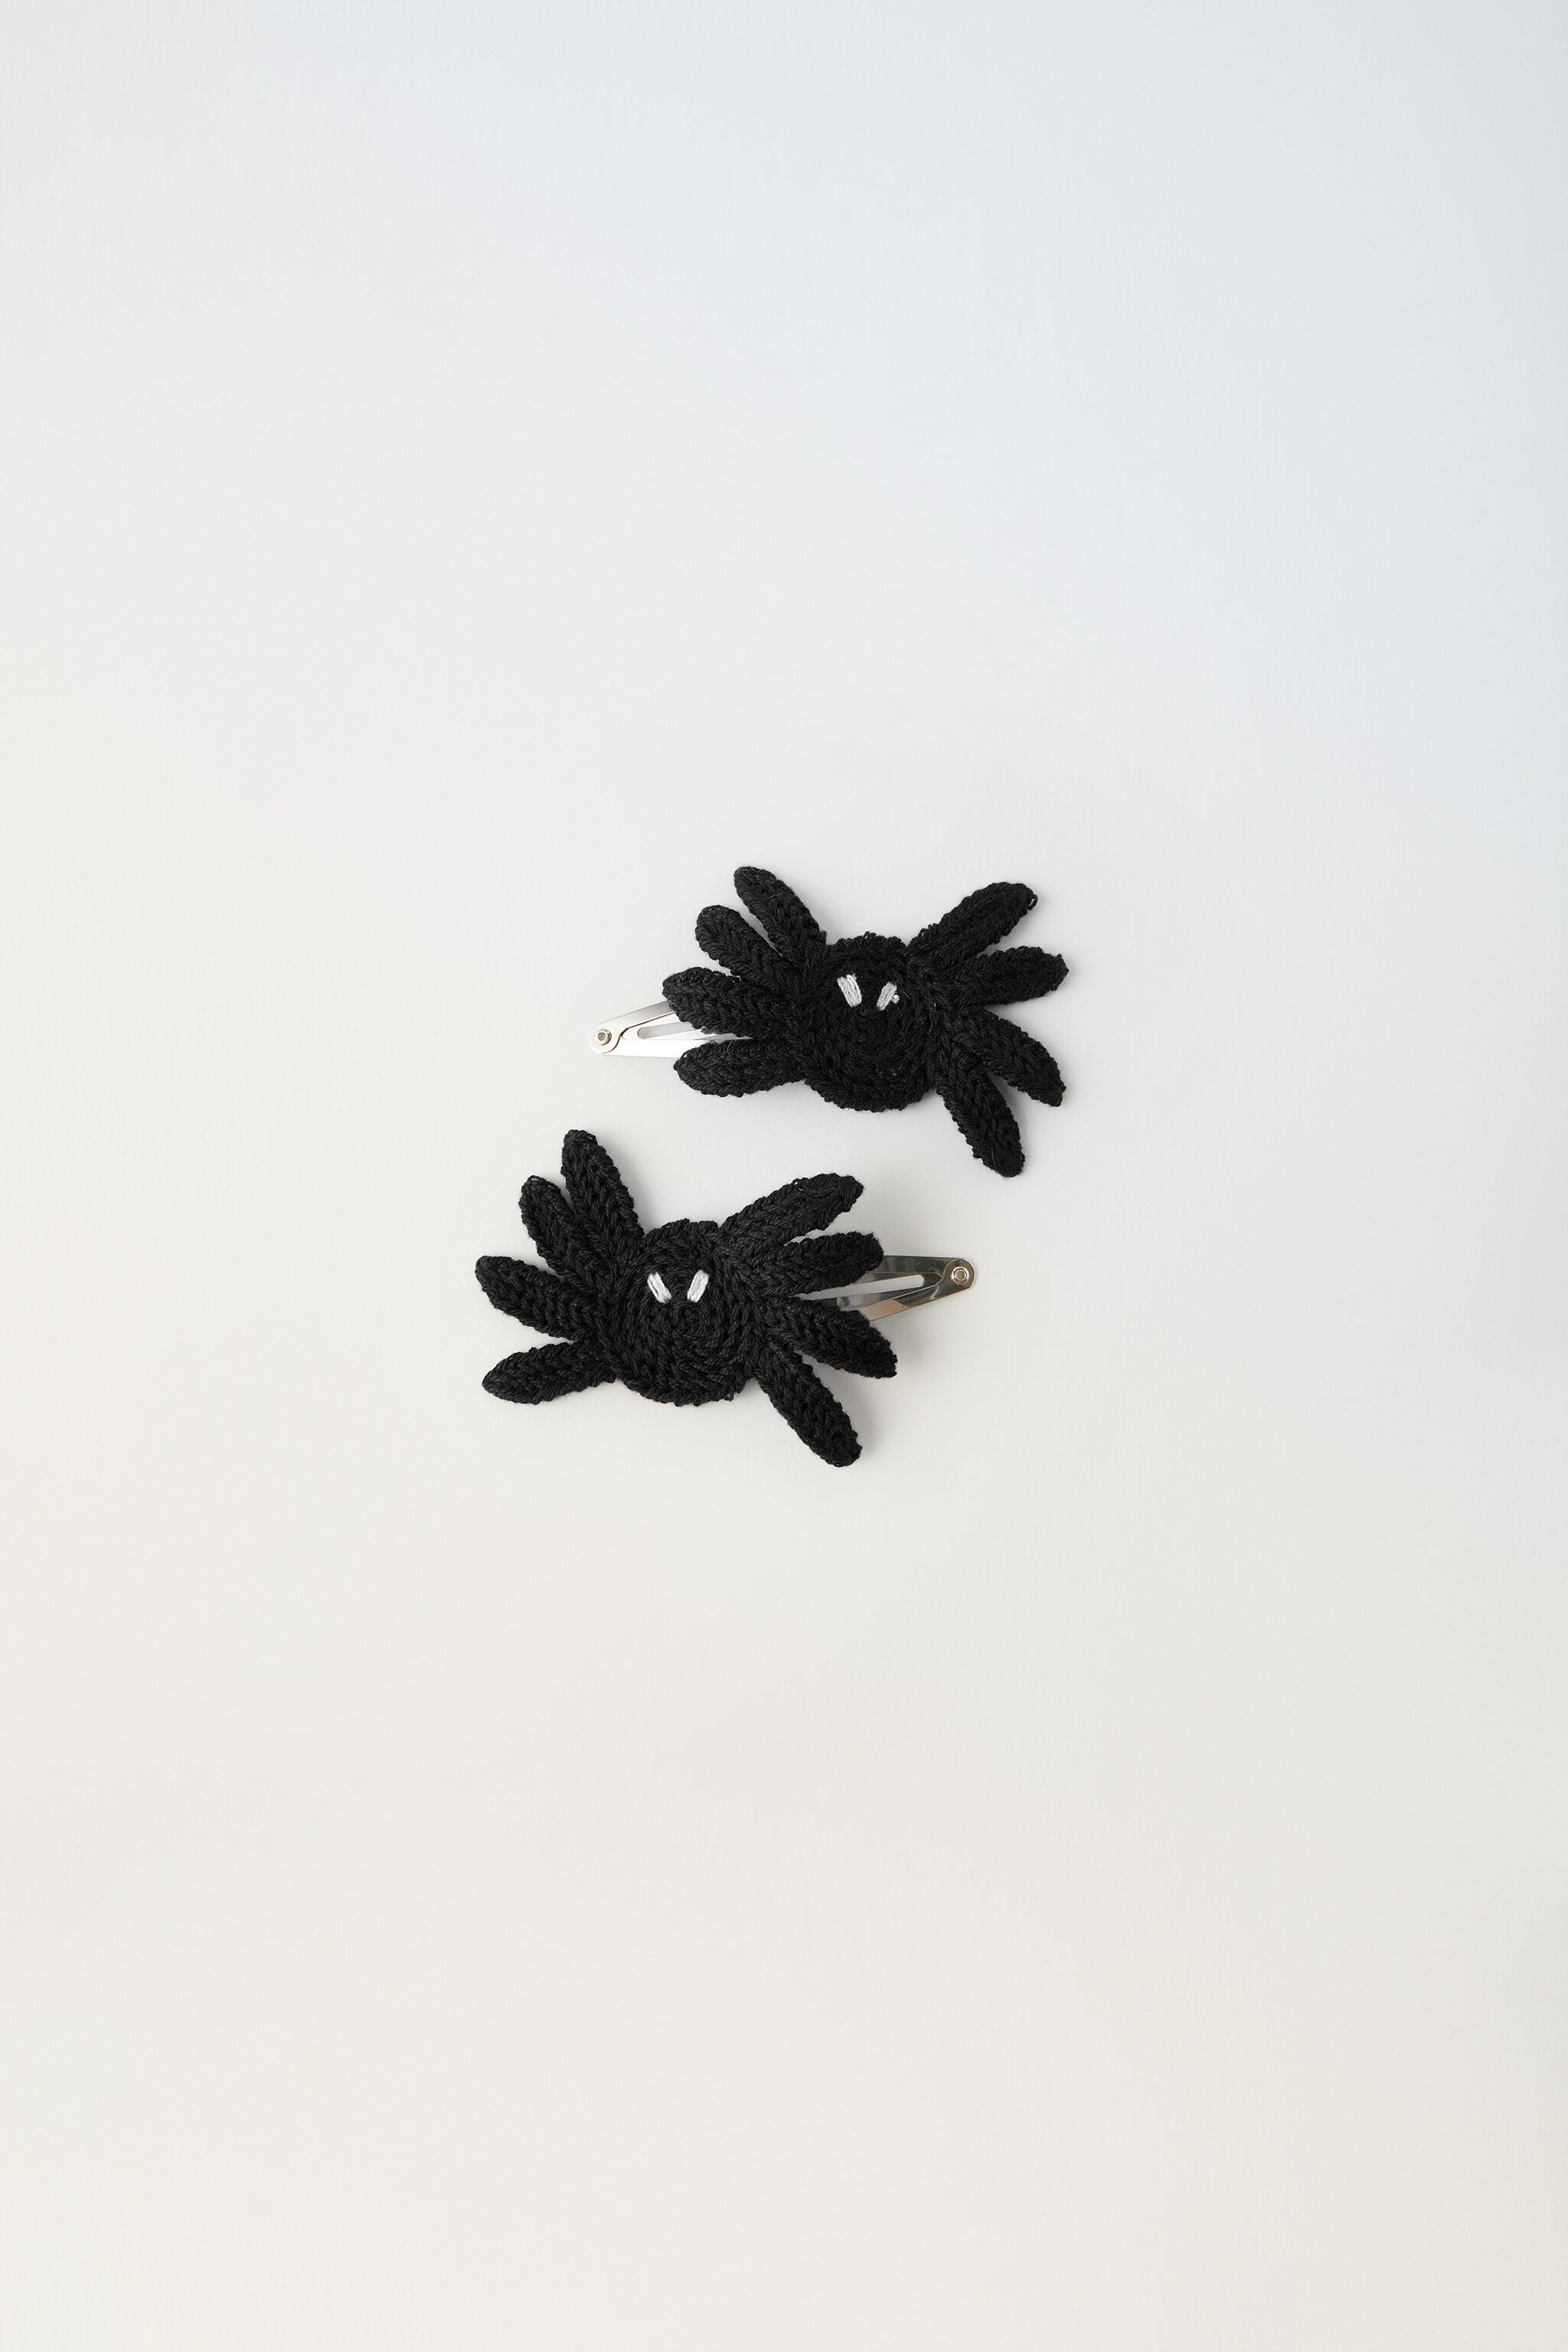 TWO PACK OF CROCHET SPIDER HALLOWEEN HAIR CLIPS